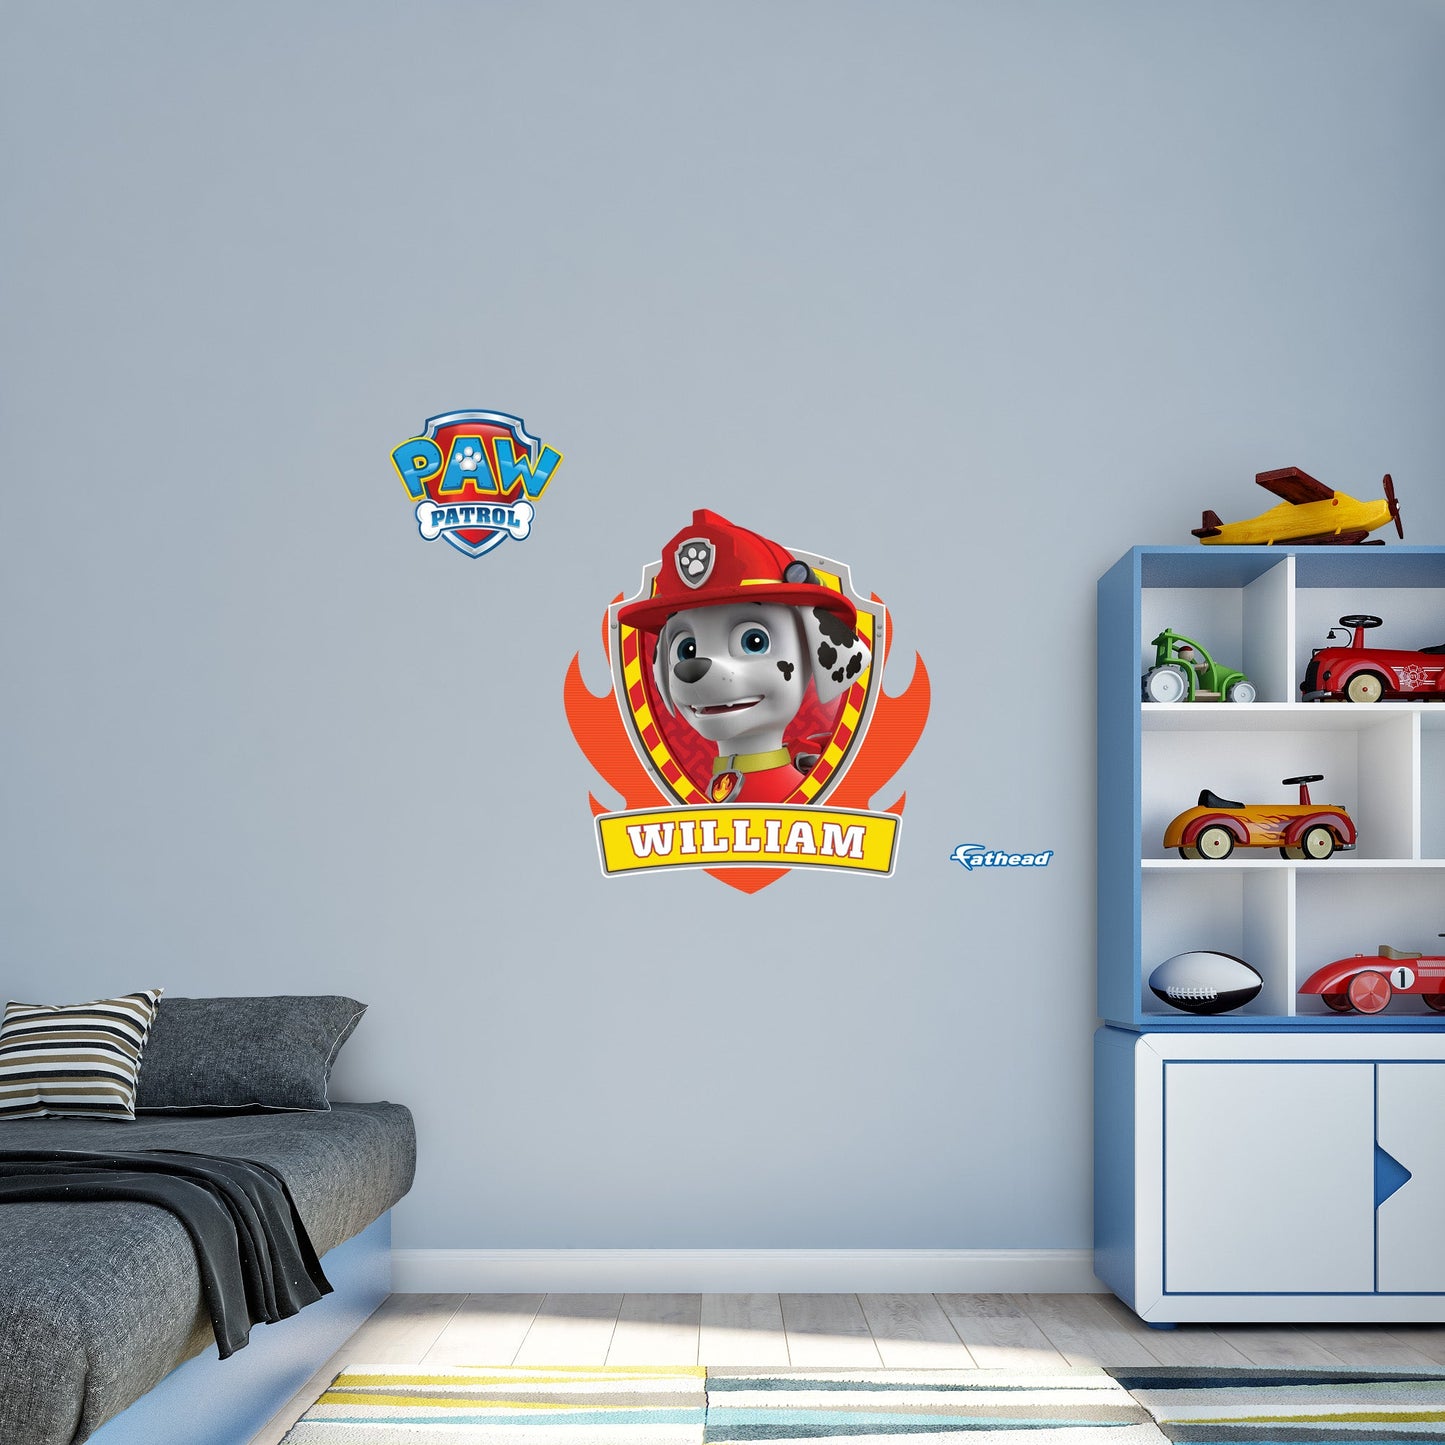 Paw Patrol: Marshall Personalized Name Icon - Officially Licensed Nickelodeon Removable Adhesive Decal